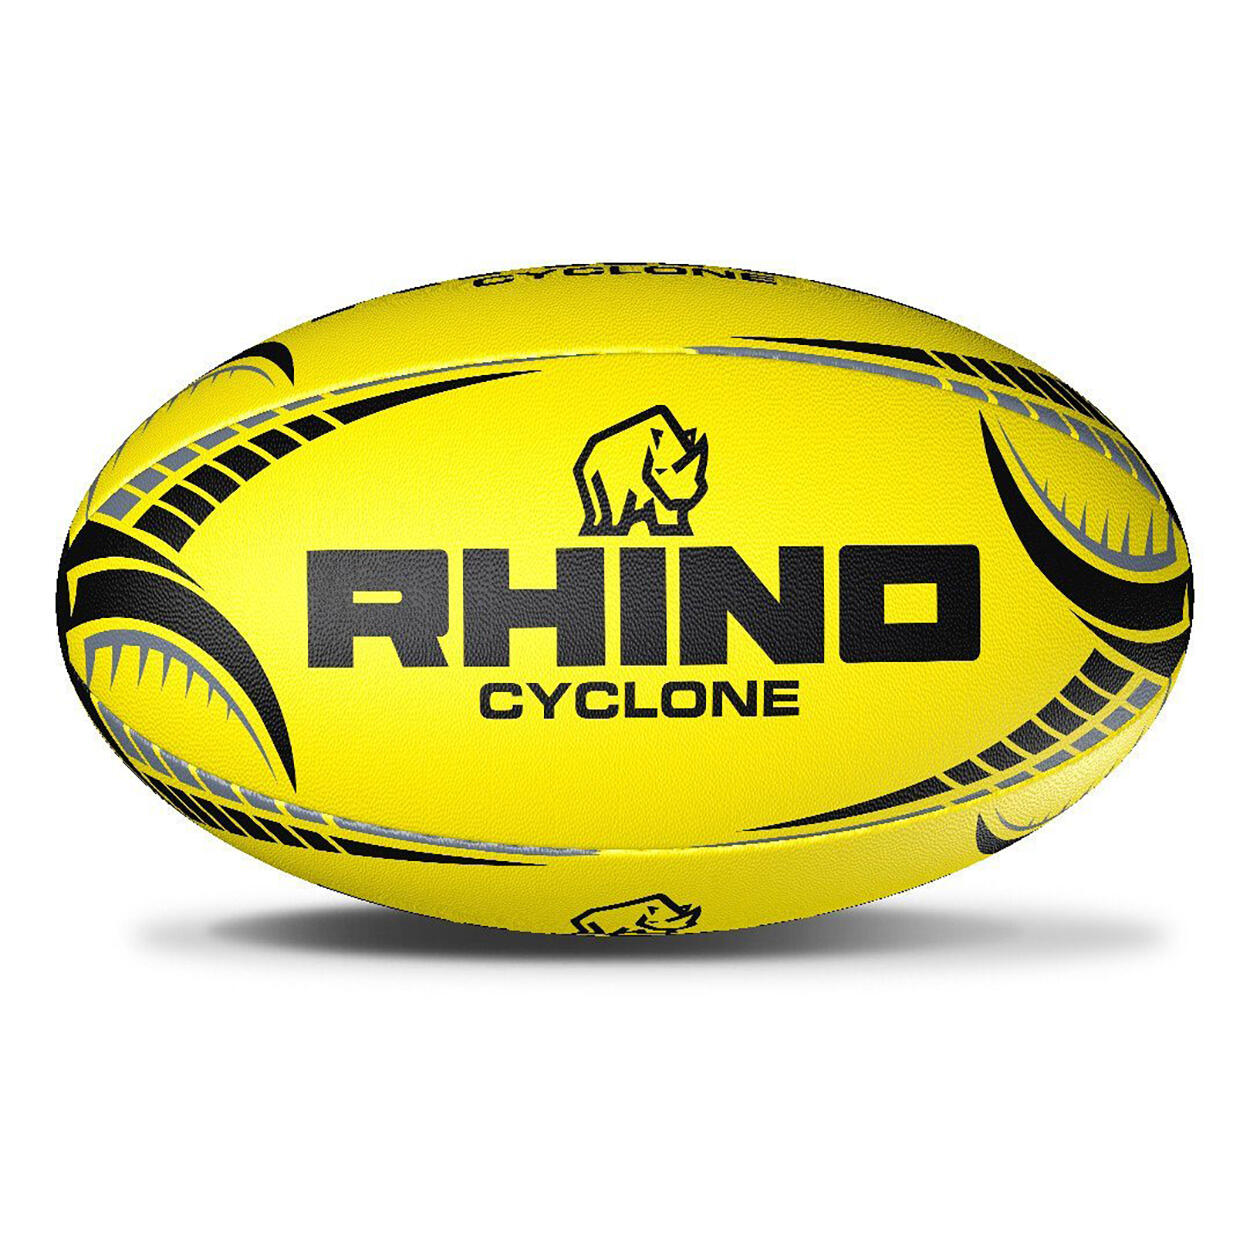 Cyclone Rugby Ball (Fluorescent Yellow) 1/3